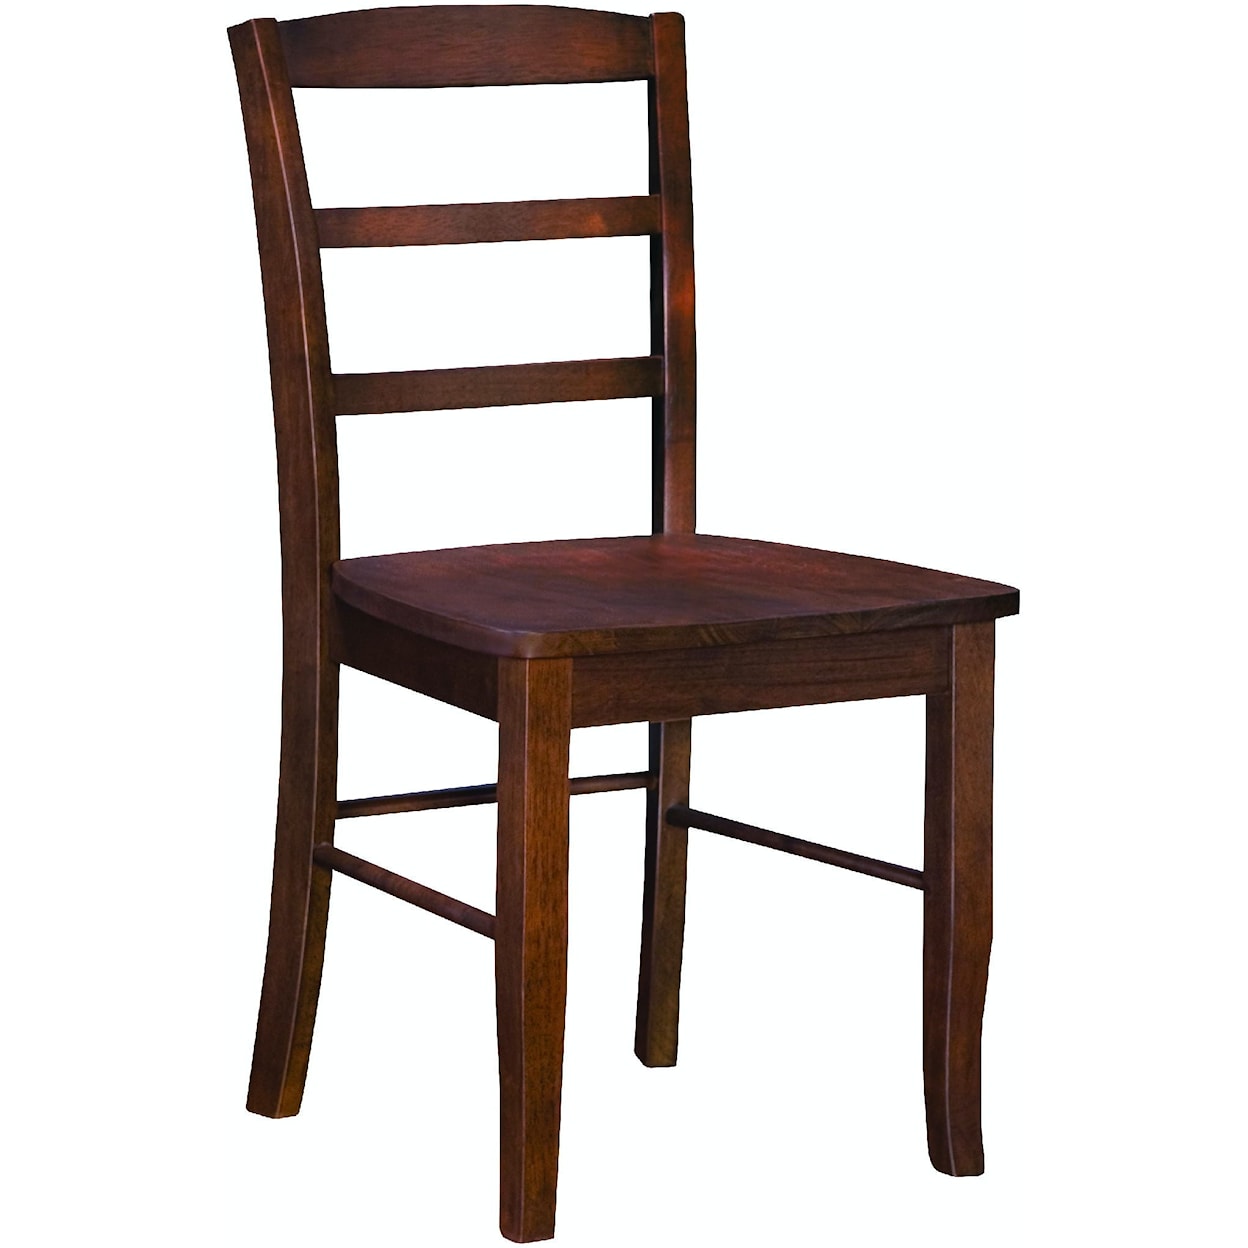 John Thomas Dining Essentials Madrid Dining Chair in Expresso